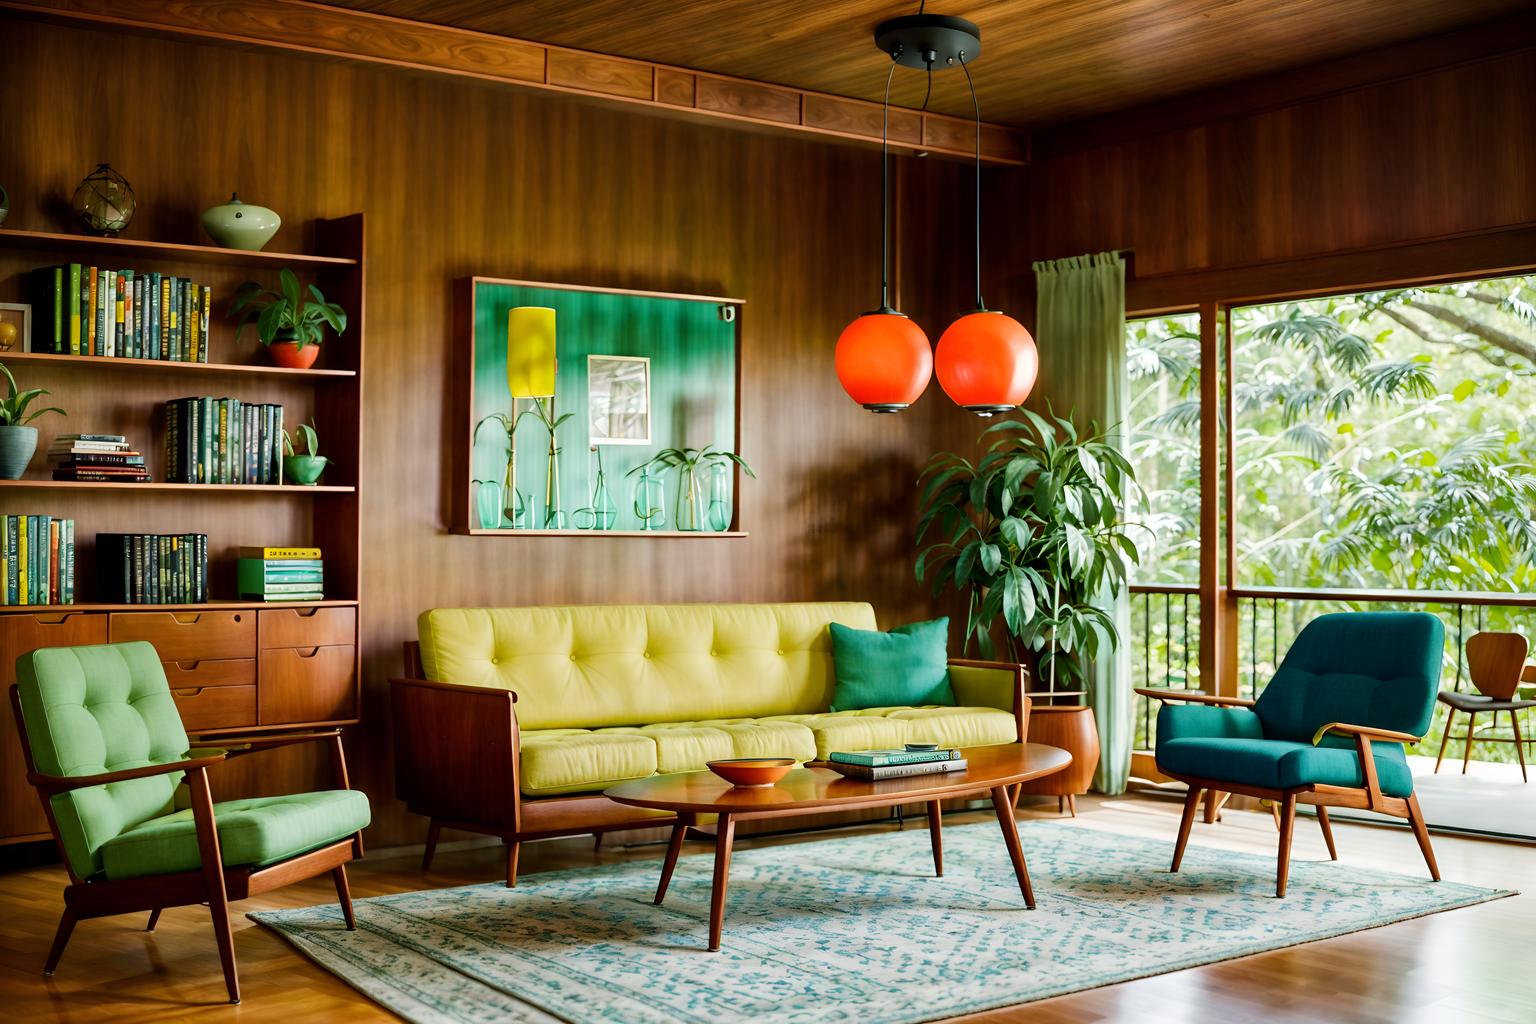 midcentury modern-style (living room interior) with plant and bookshelves and chairs and electric lamps and furniture and sofa and coffee tables and televisions. . with integrating indoor and outdoor motifs and vibrant colors and natural and manmade materials and wood pendant light mid century modern chandelier and function over form and minimalist and mid century modern mobile chandelier and nature indoors. . cinematic photo, highly detailed, cinematic lighting, ultra-detailed, ultrarealistic, photorealism, 8k. midcentury modern interior design style. masterpiece, cinematic light, ultrarealistic+, photorealistic+, 8k, raw photo, realistic, sharp focus on eyes, (symmetrical eyes), (intact eyes), hyperrealistic, highest quality, best quality, , highly detailed, masterpiece, best quality, extremely detailed 8k wallpaper, masterpiece, best quality, ultra-detailed, best shadow, detailed background, detailed face, detailed eyes, high contrast, best illumination, detailed face, dulux, caustic, dynamic angle, detailed glow. dramatic lighting. highly detailed, insanely detailed hair, symmetrical, intricate details, professionally retouched, 8k high definition. strong bokeh. award winning photo.